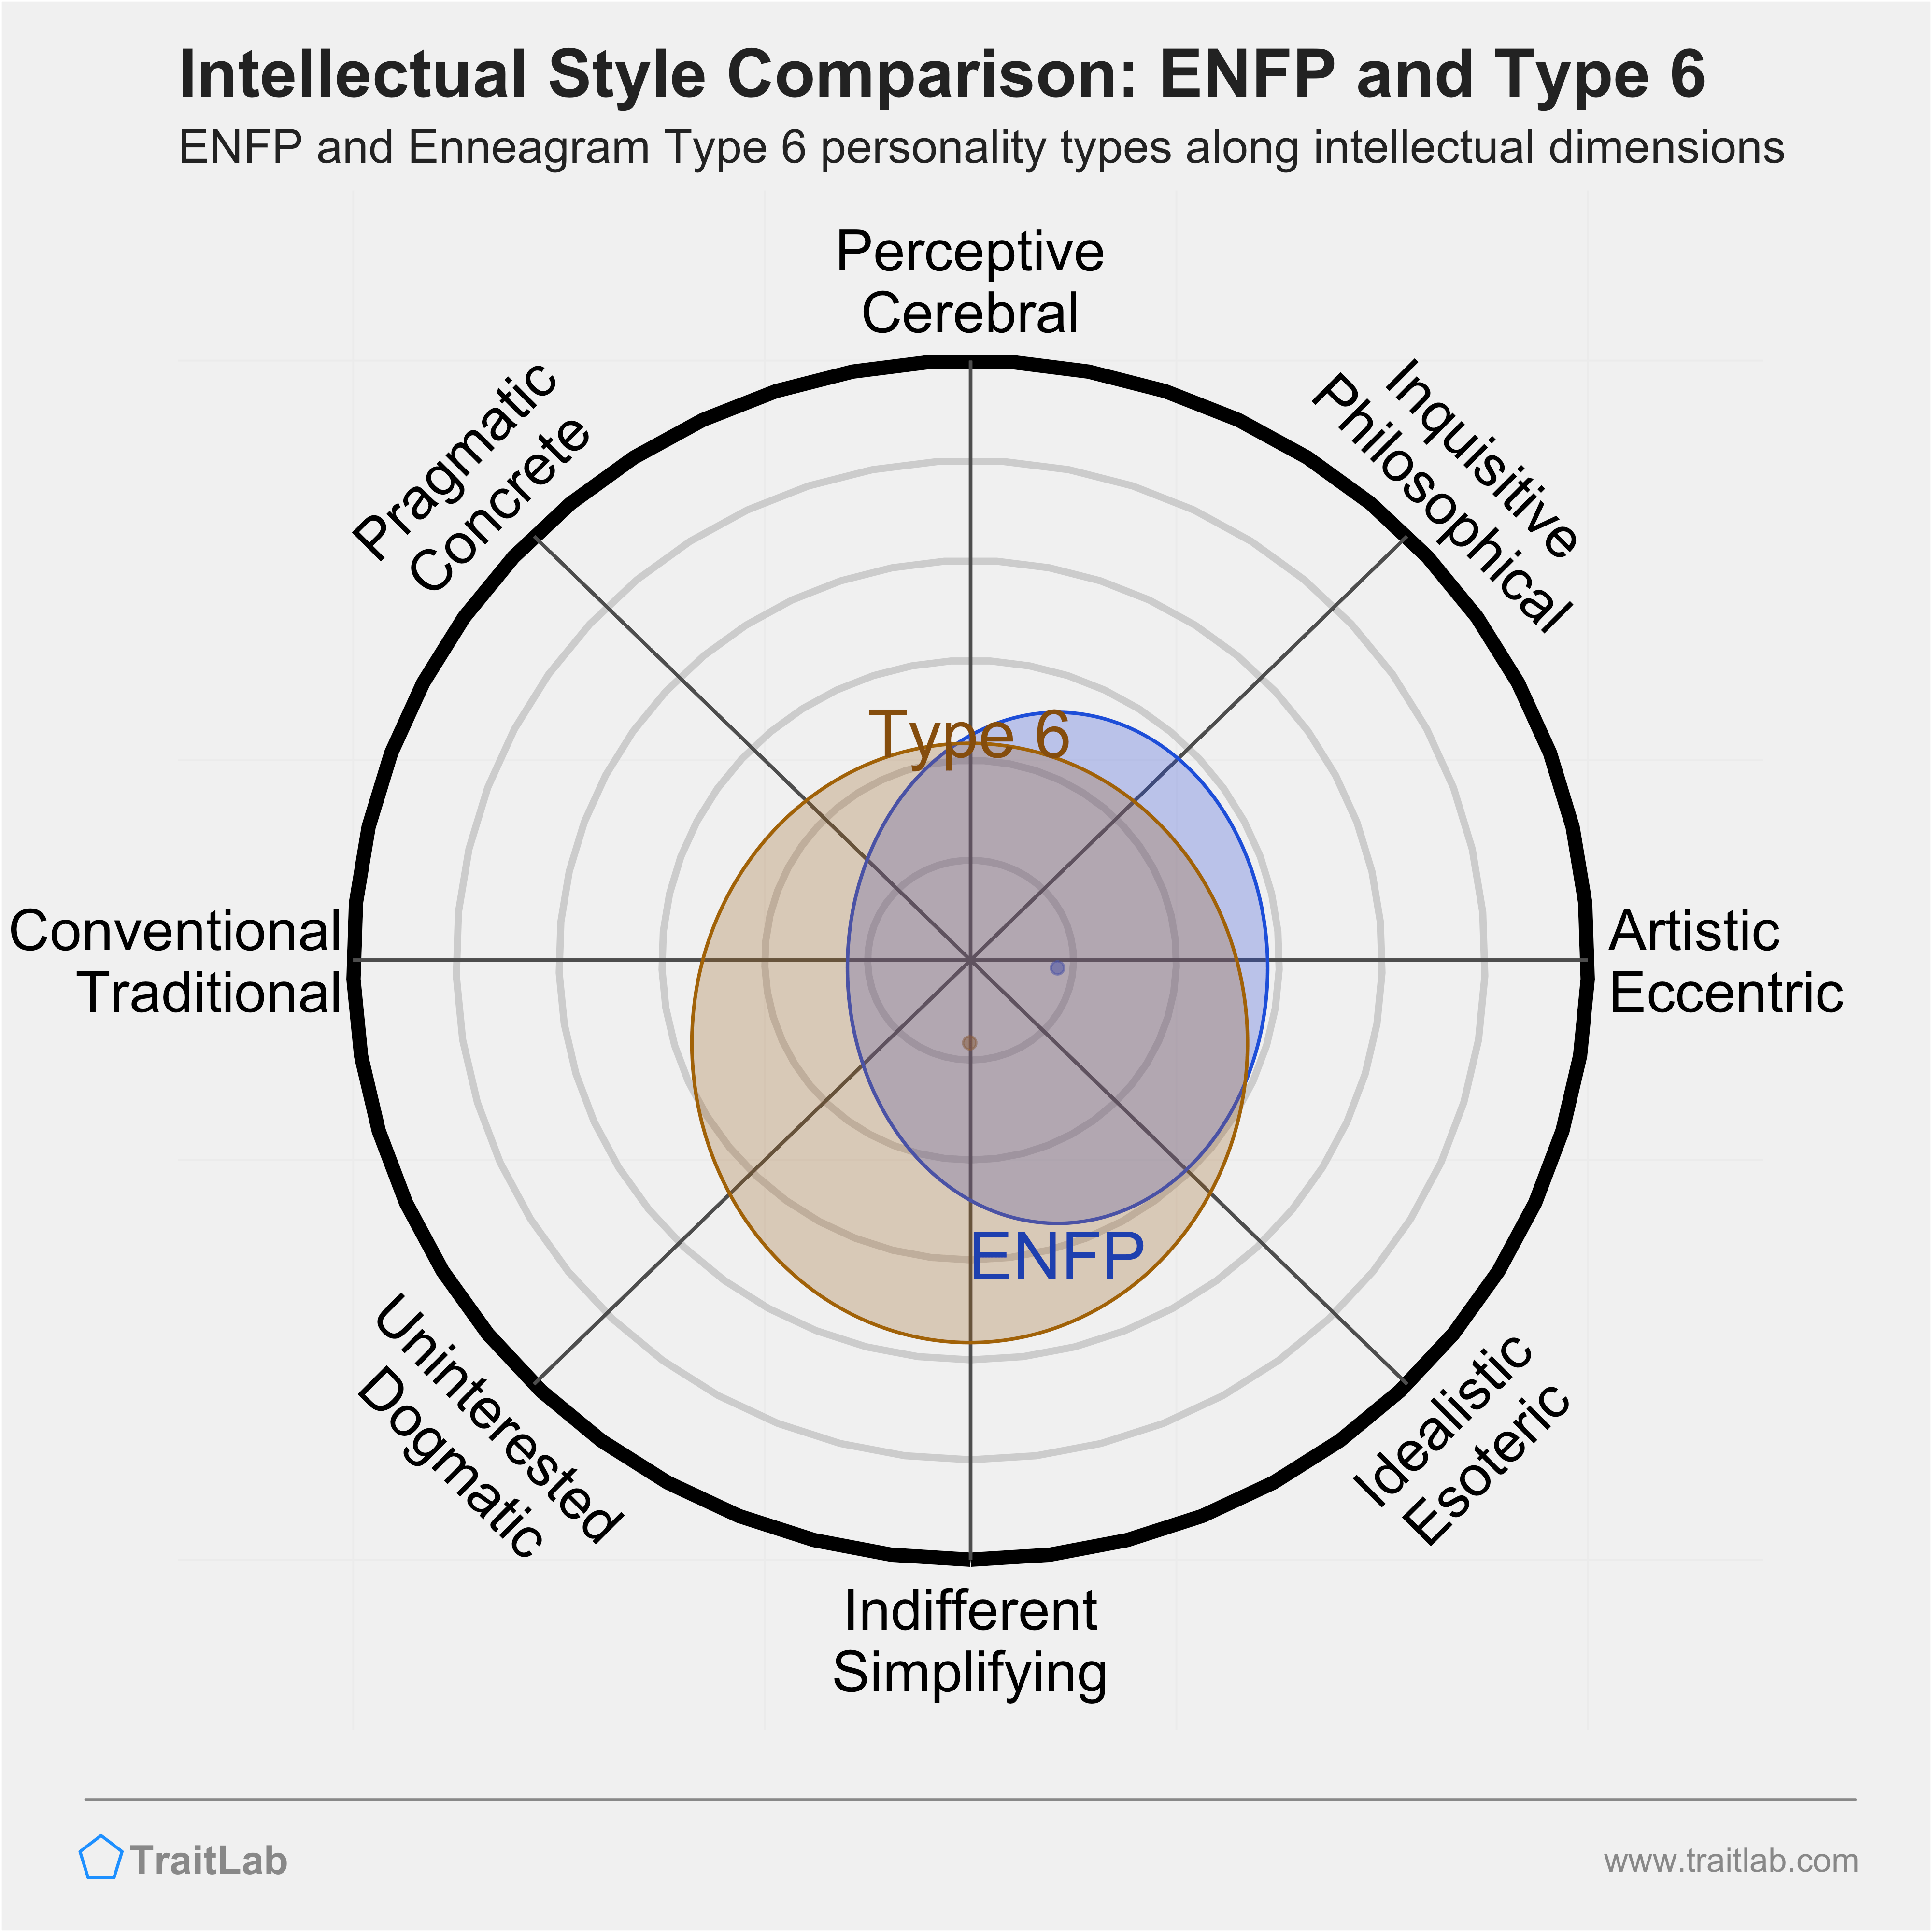 ENFP and Type 6 comparison across intellectual dimensions